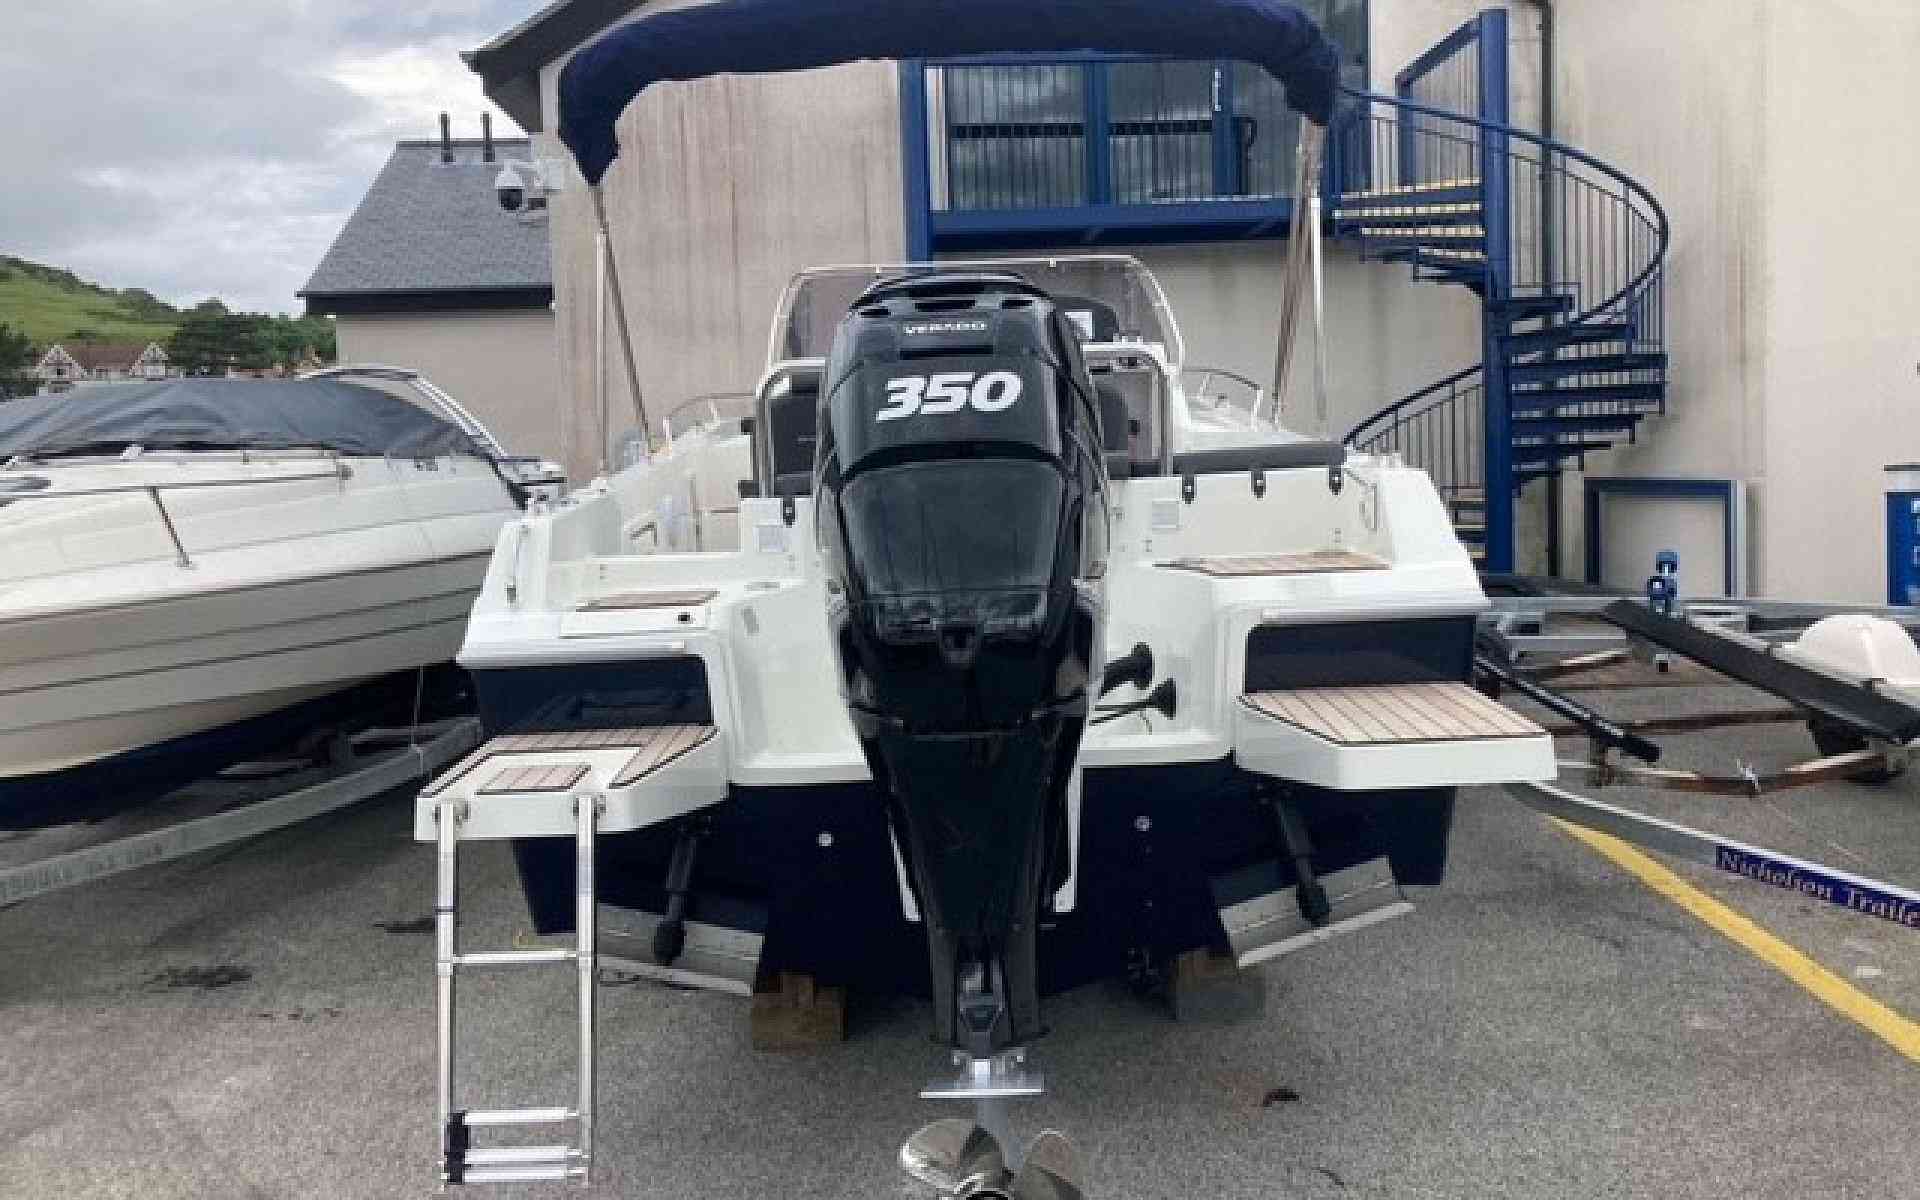 ATLANTIC 730 SUN CRUISER engine image new boats for sale in UK 